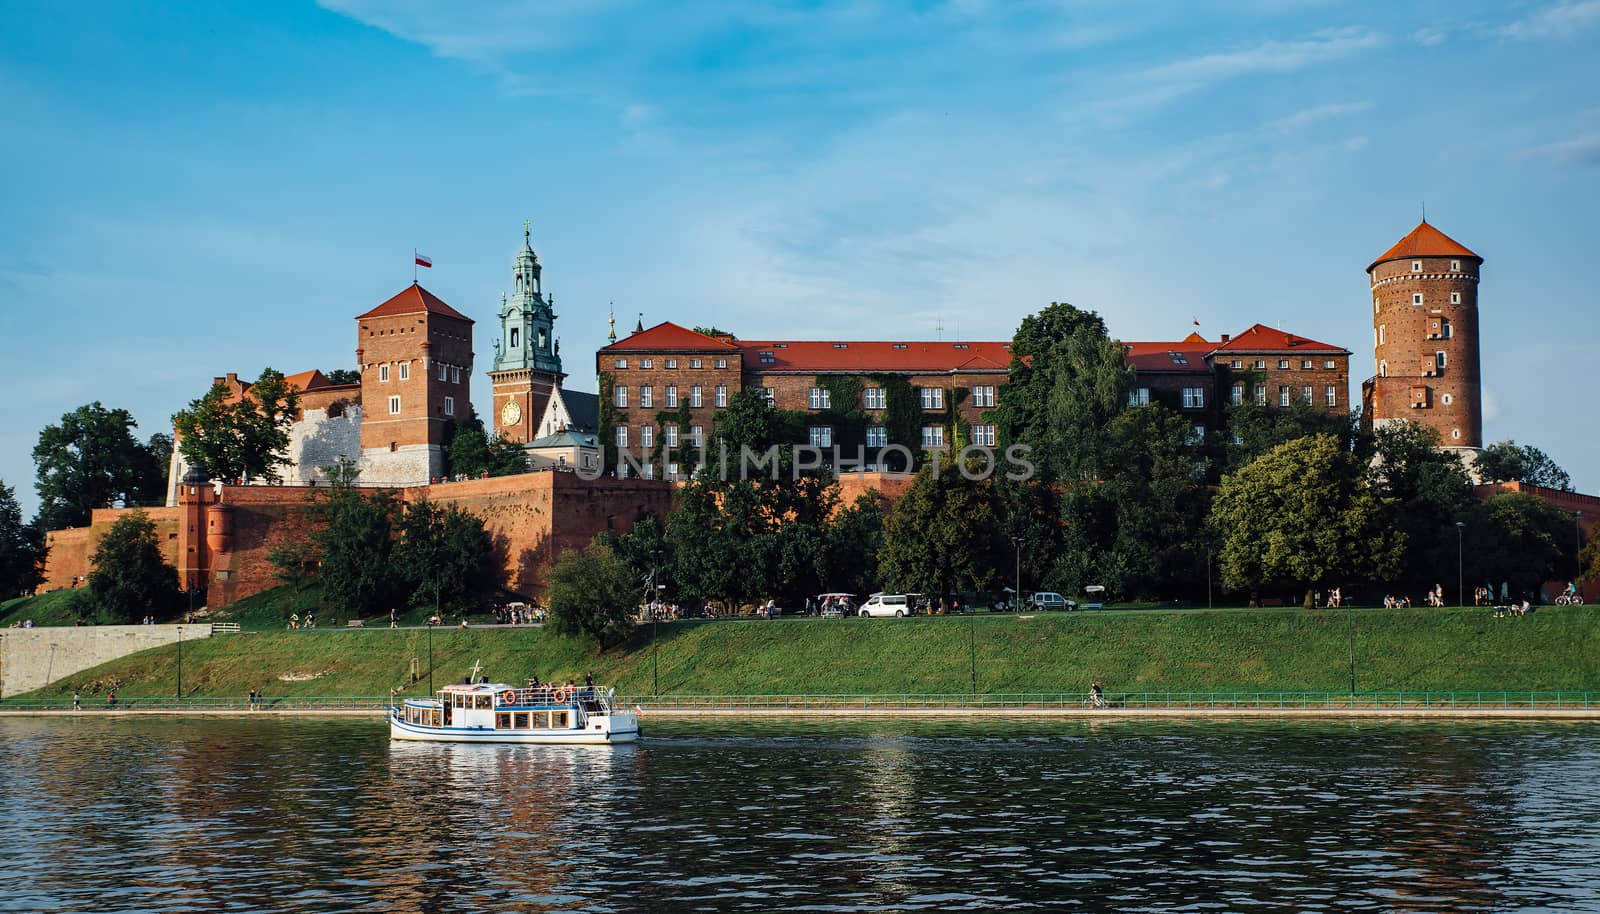 The Wawel castle in Krakow, Poland, in the foreground the Vistula river.